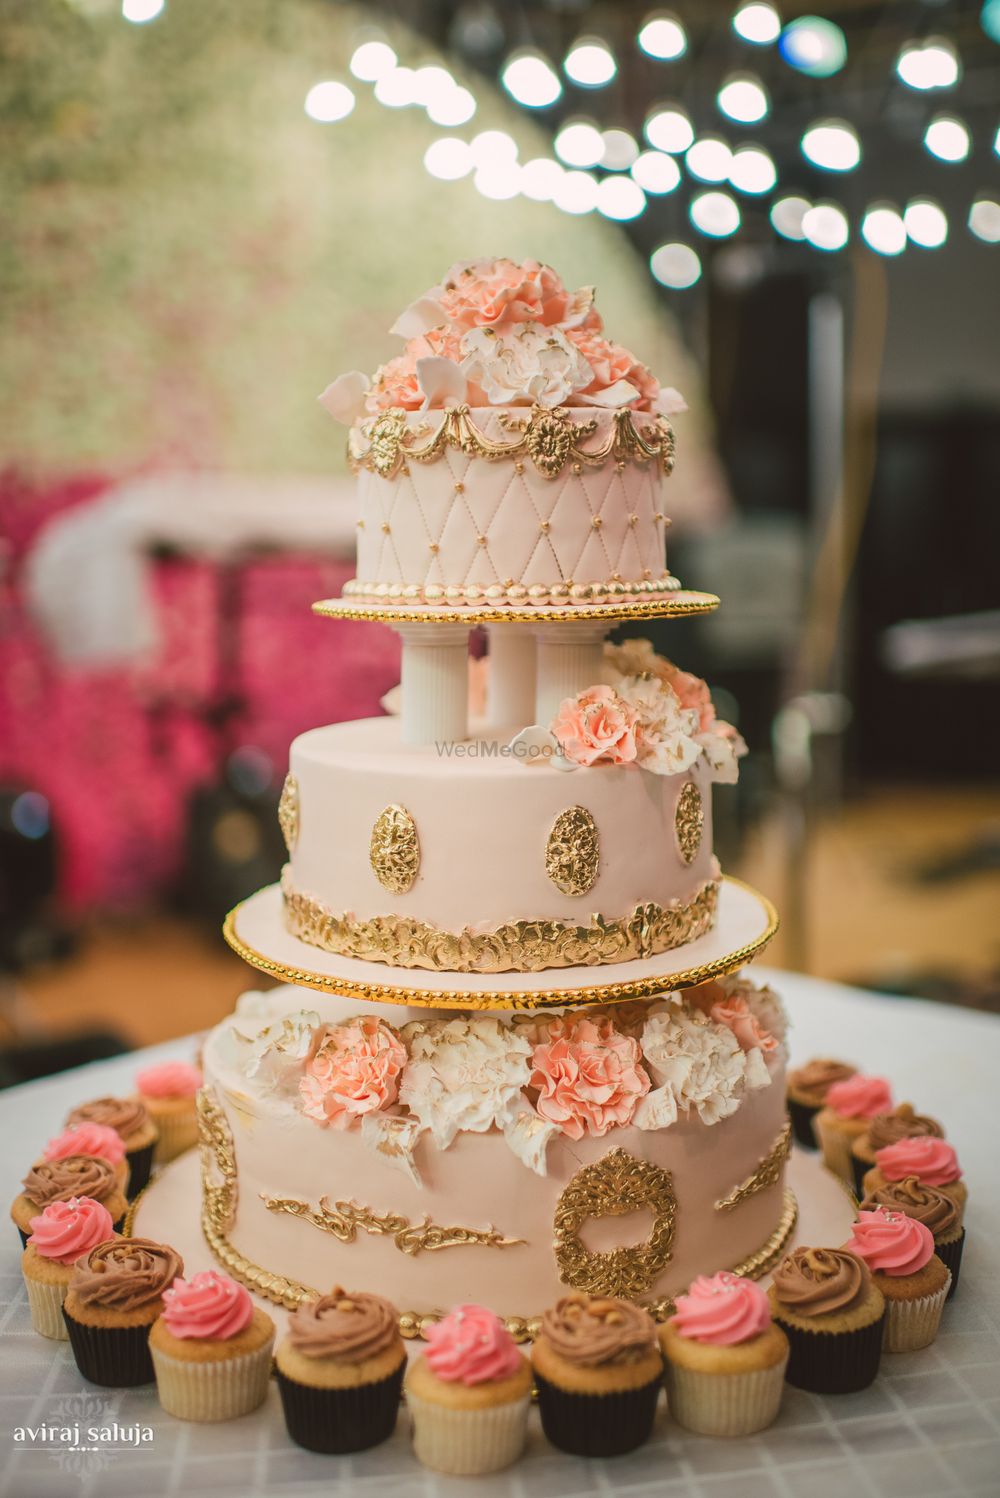 Photo of 3 tier white and peach wedding cake with gold details